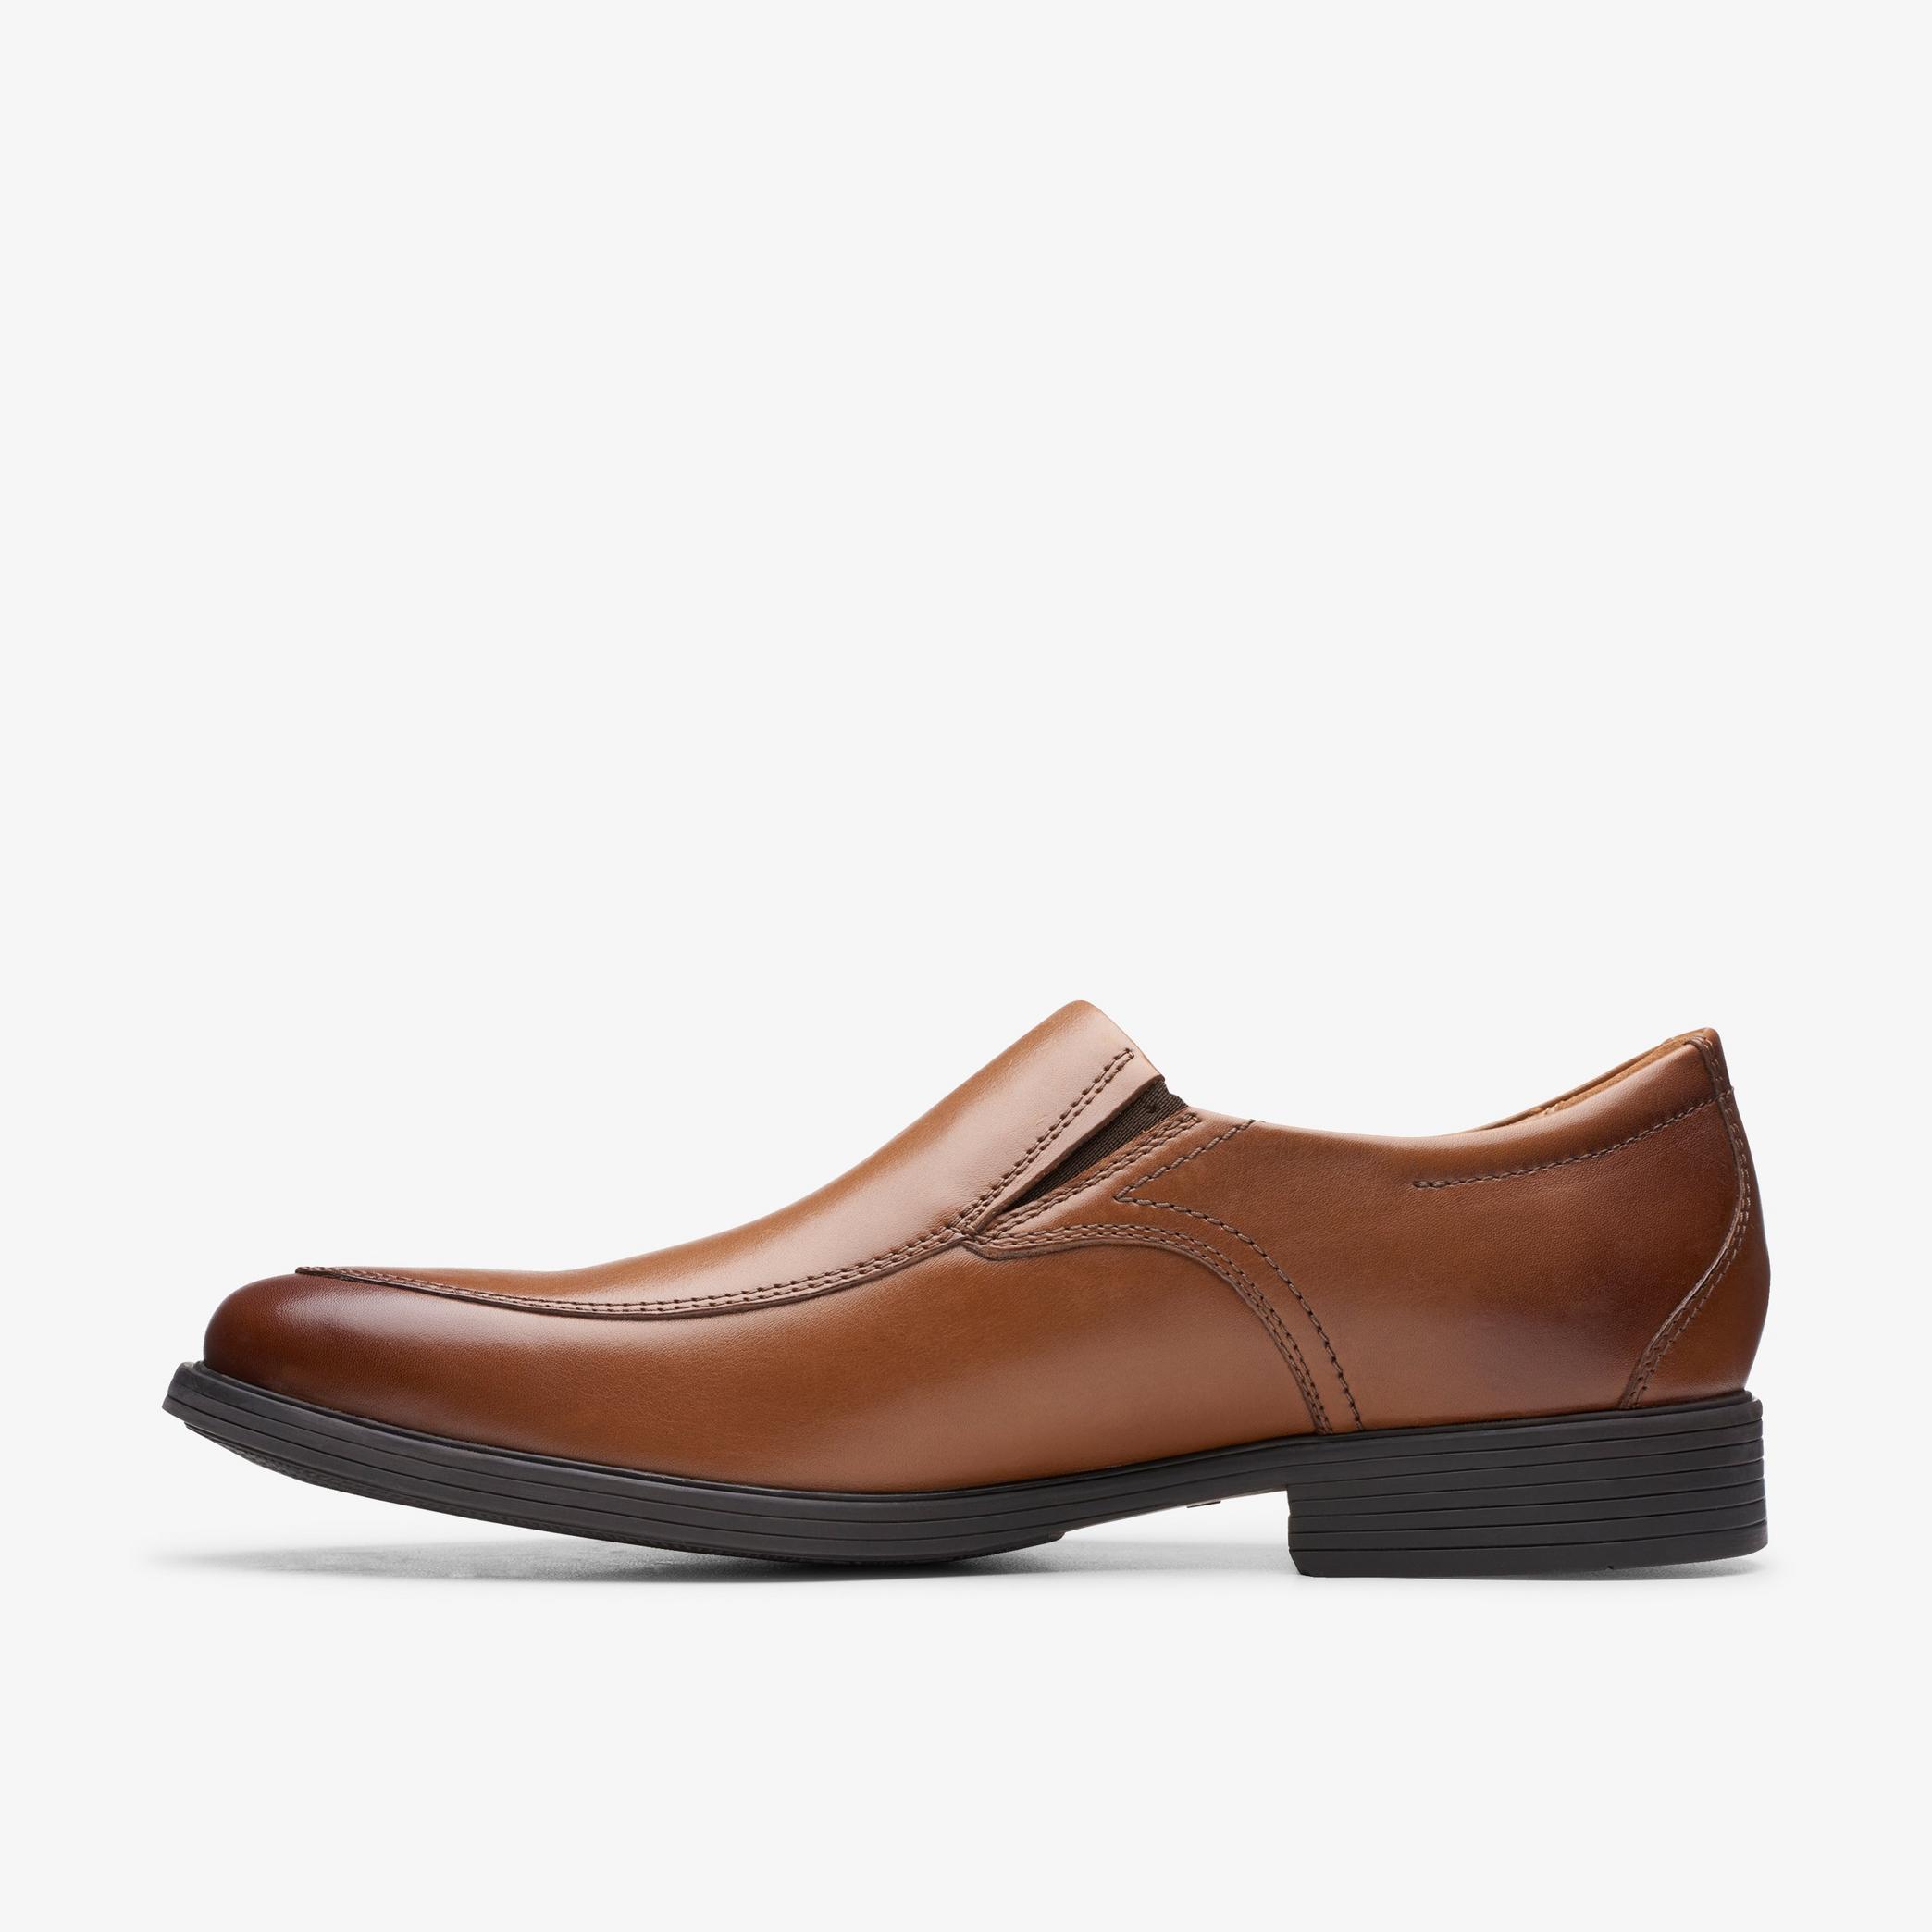 Whiddon Step Dark Tan Leather Loafers, view 2 of 6